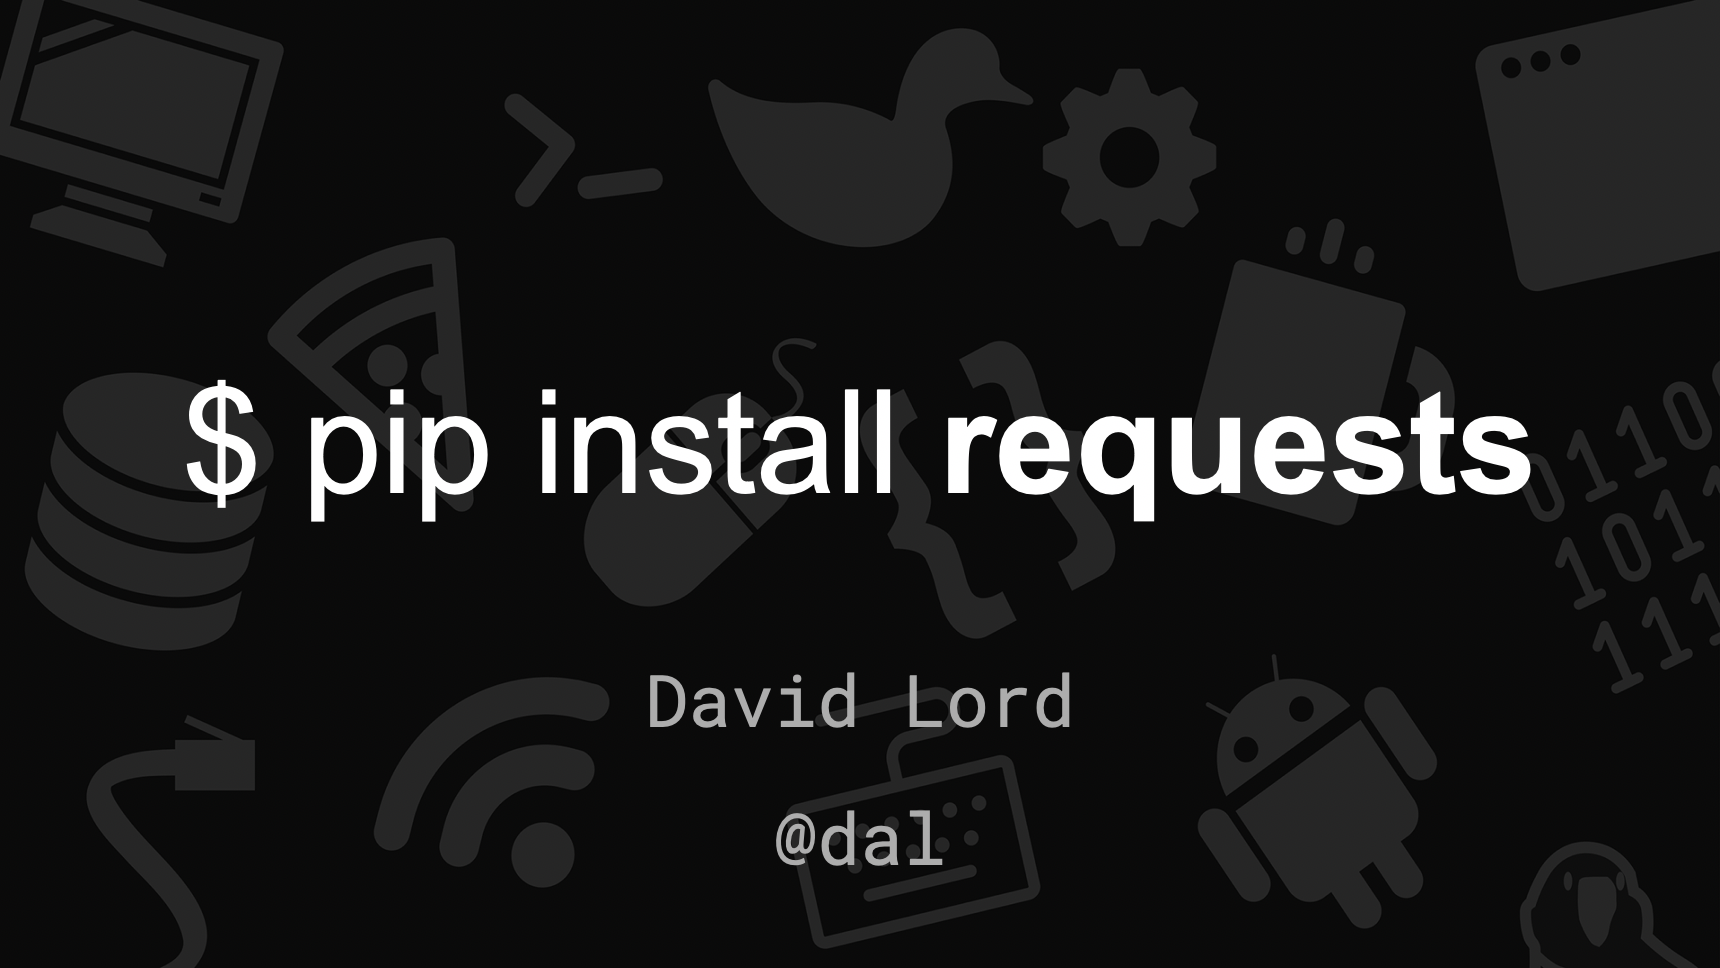 Thumbnail of the title slide, reading '$ pip install requests'.